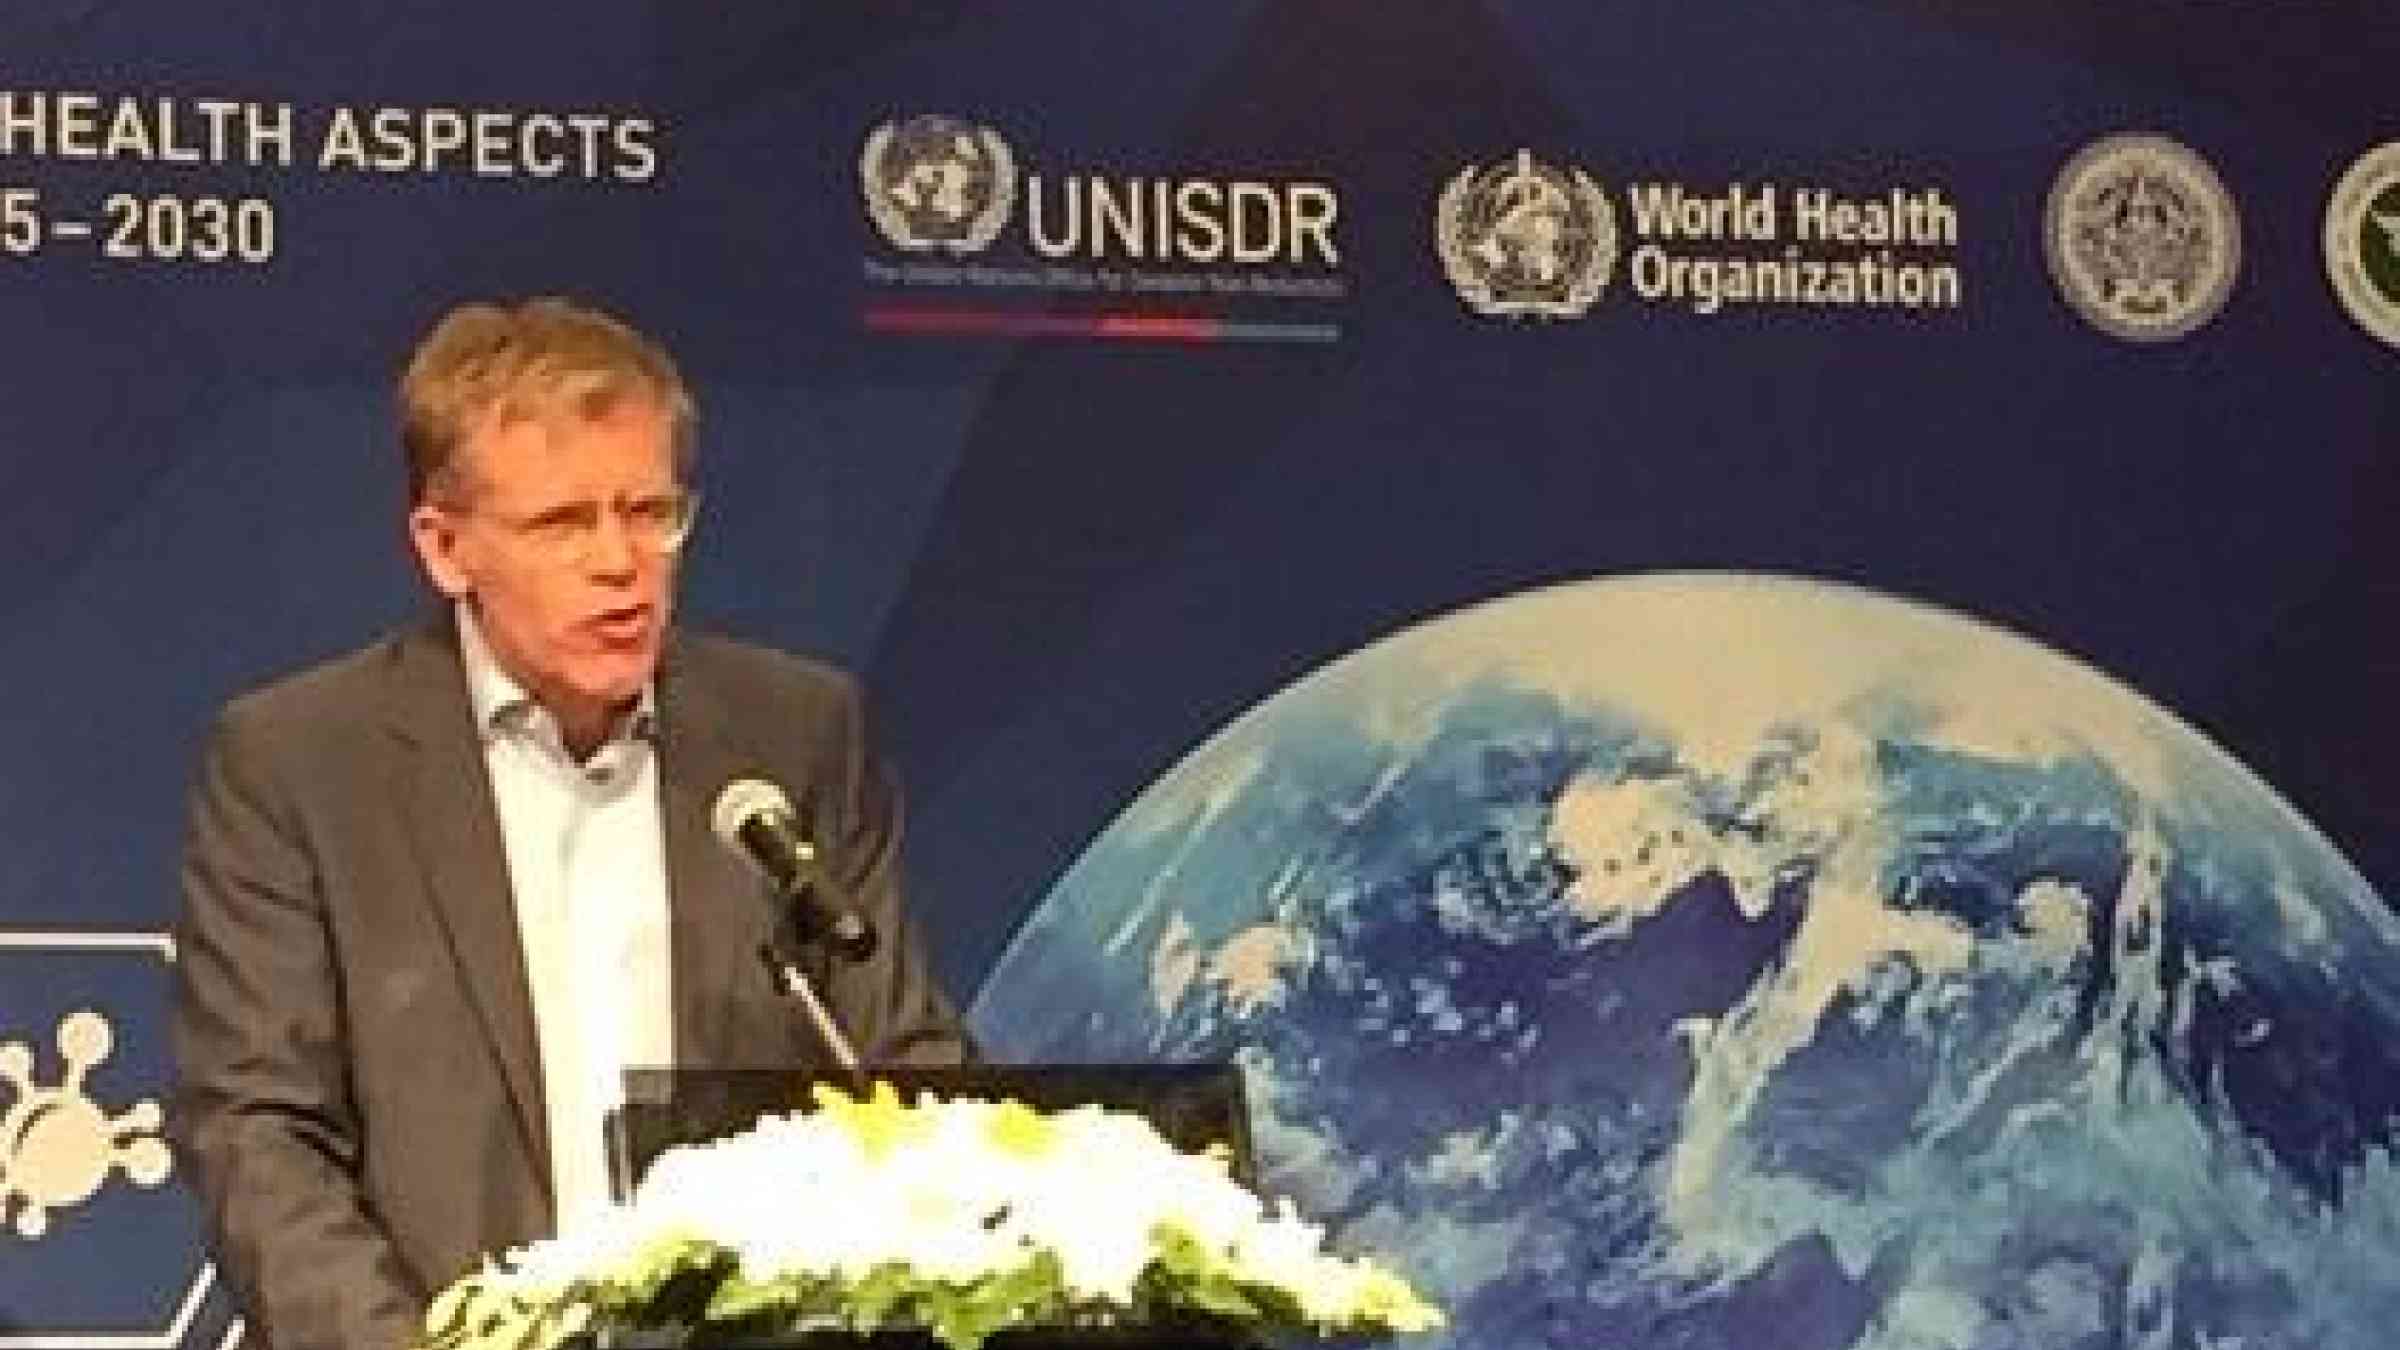 The Sendai Framework is a valuable instrument for ensuring better health outcomes in disasters, according to Dr. Bruce Aylward, Executive Director a.i., Outbreaks and Health Emergencies, World Health Organization (Photo: UNISDR)